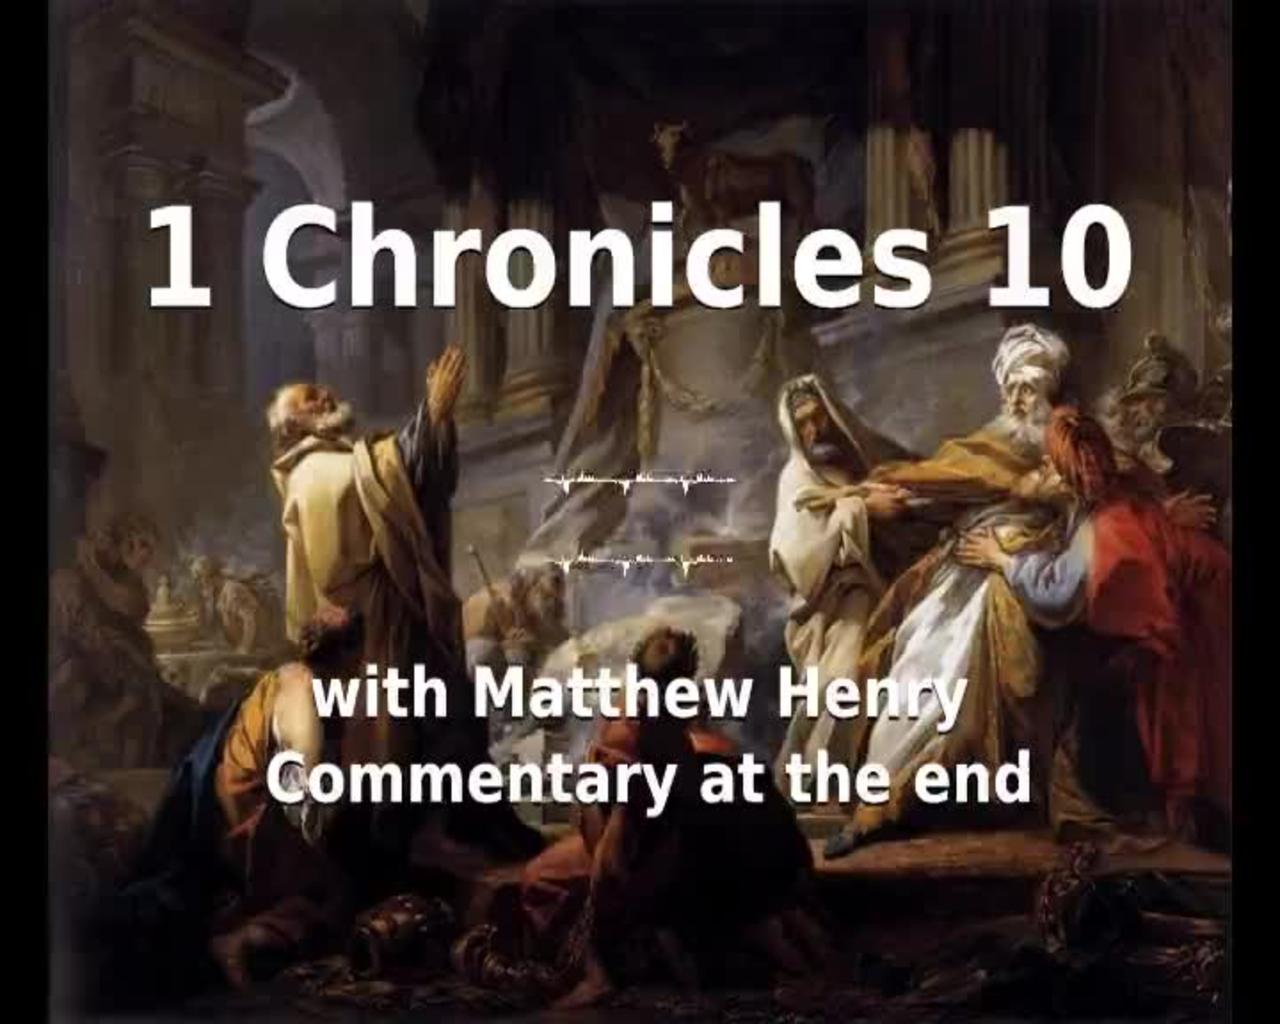 📖🕯 Holy Bible - 1 Chronicles 10 with Matthew Henry Commentary at the end.